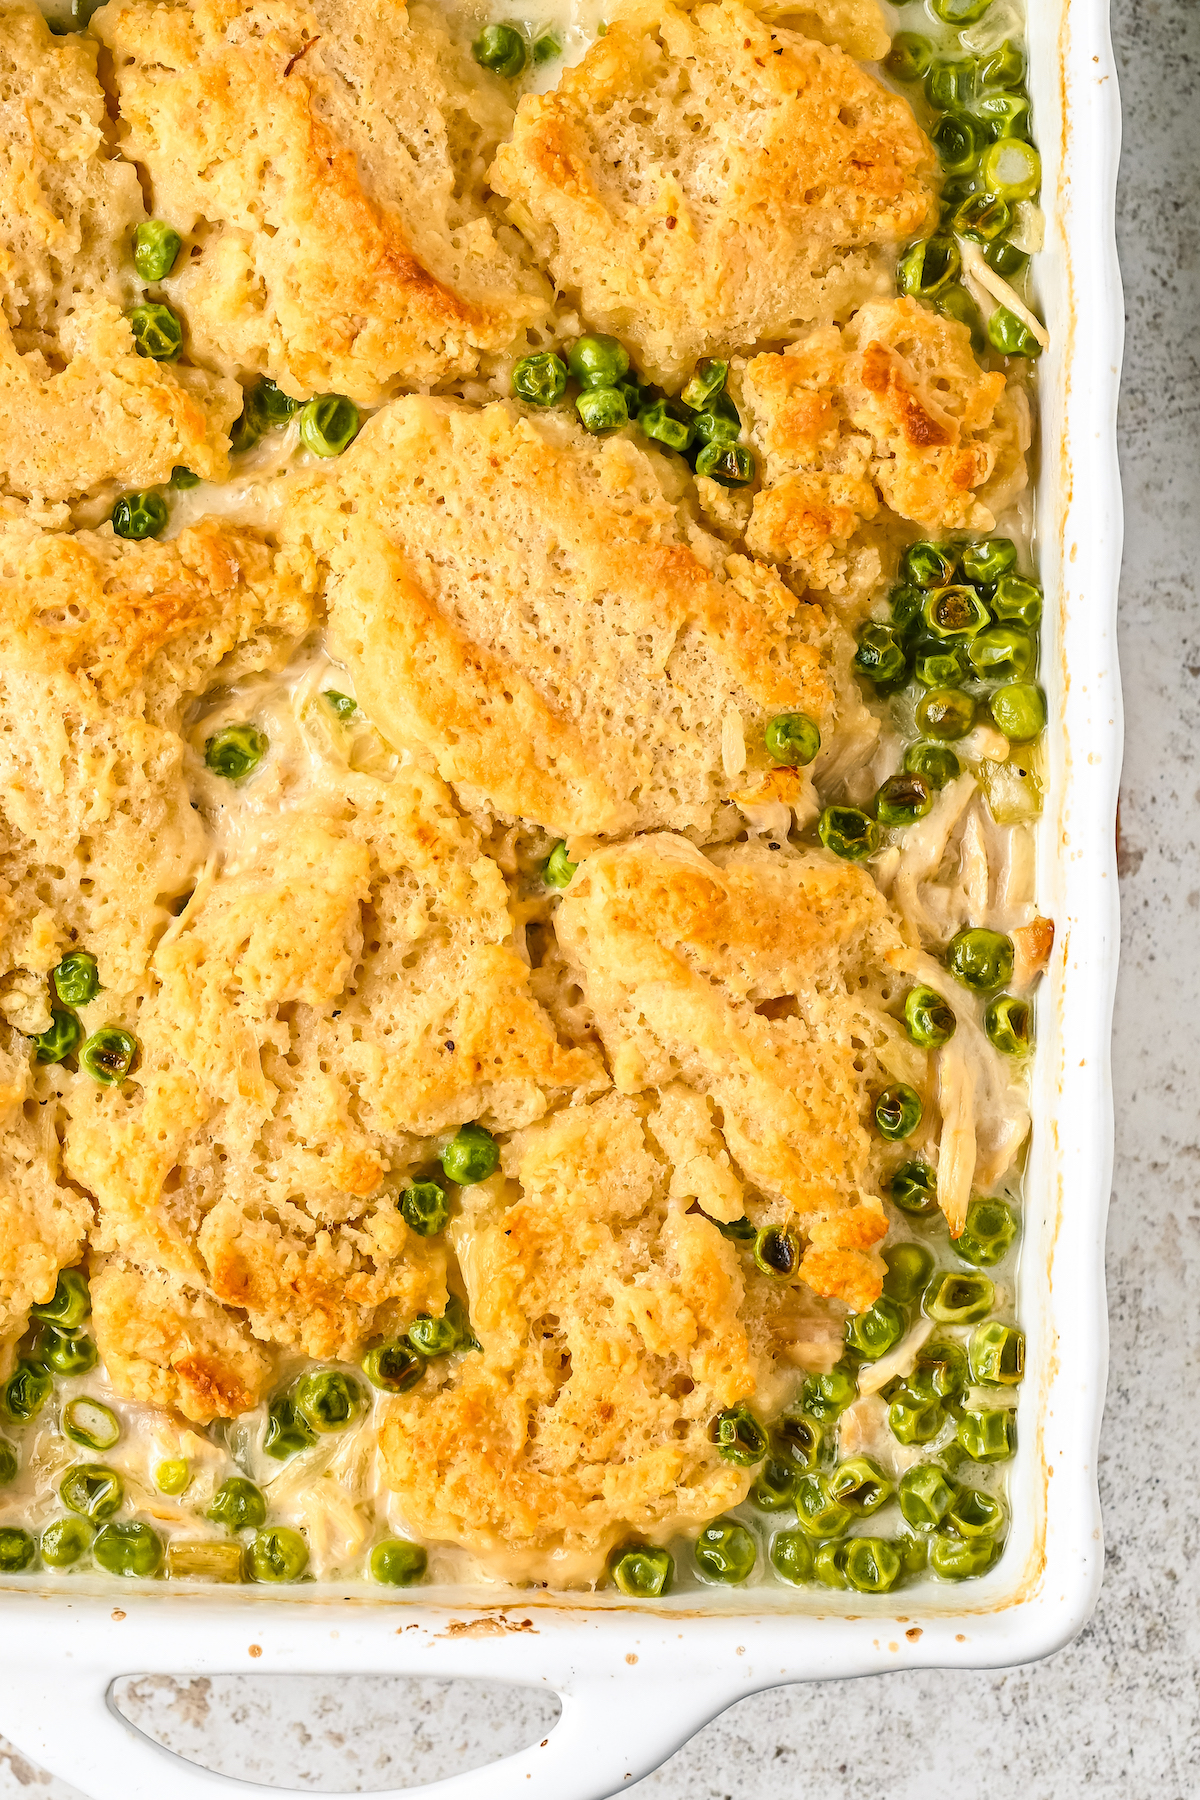 Oven-baked chicken and dumplings in a white casserole dish.